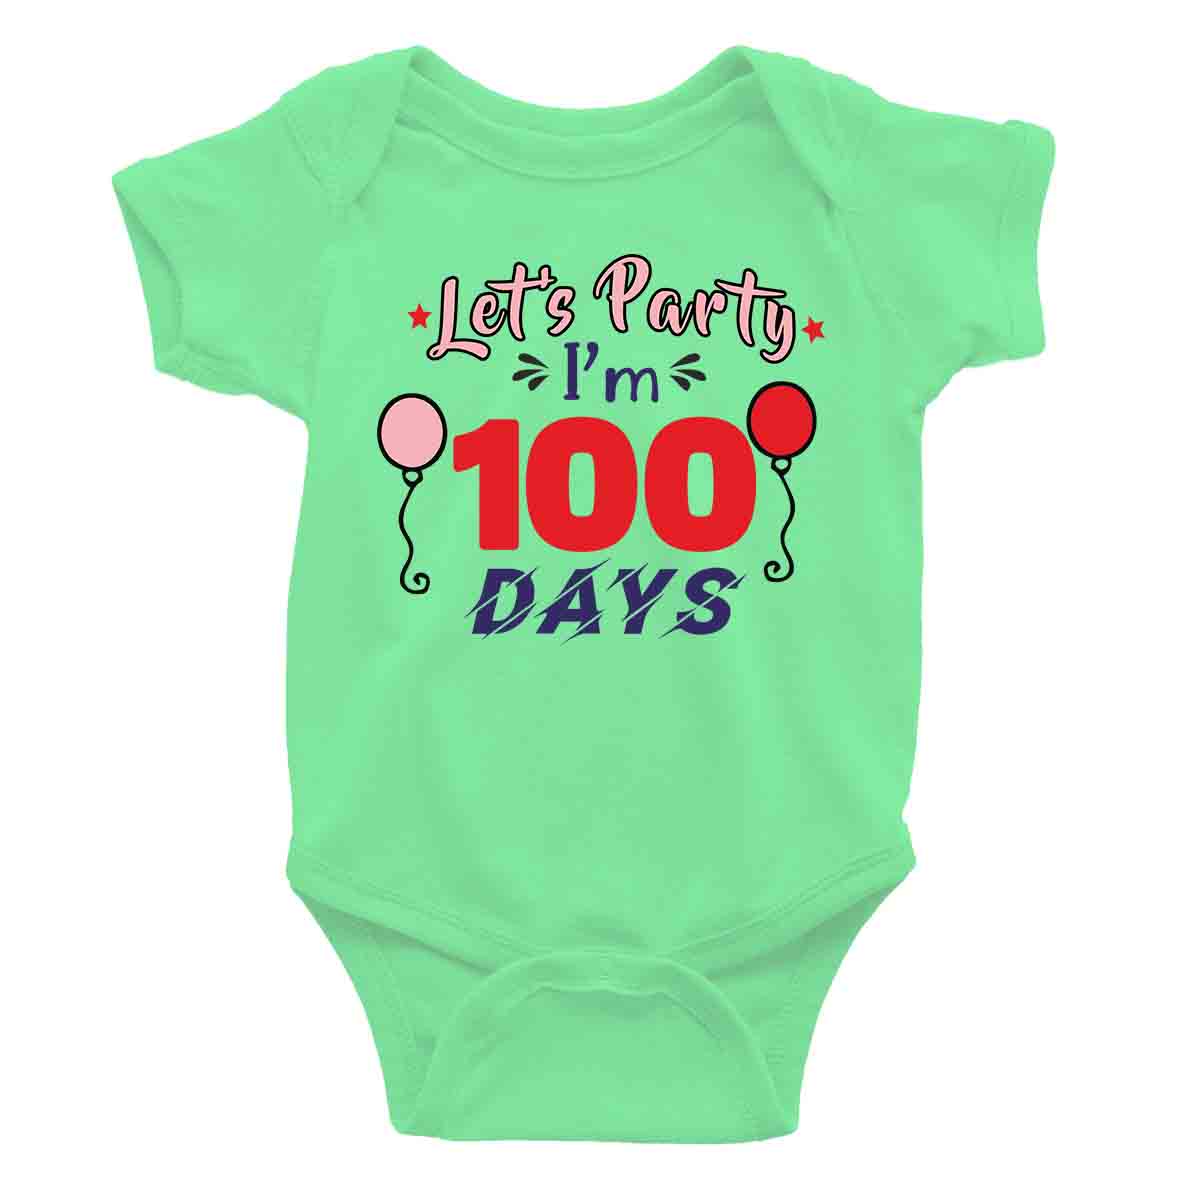 party 100 days ROMPER mint green